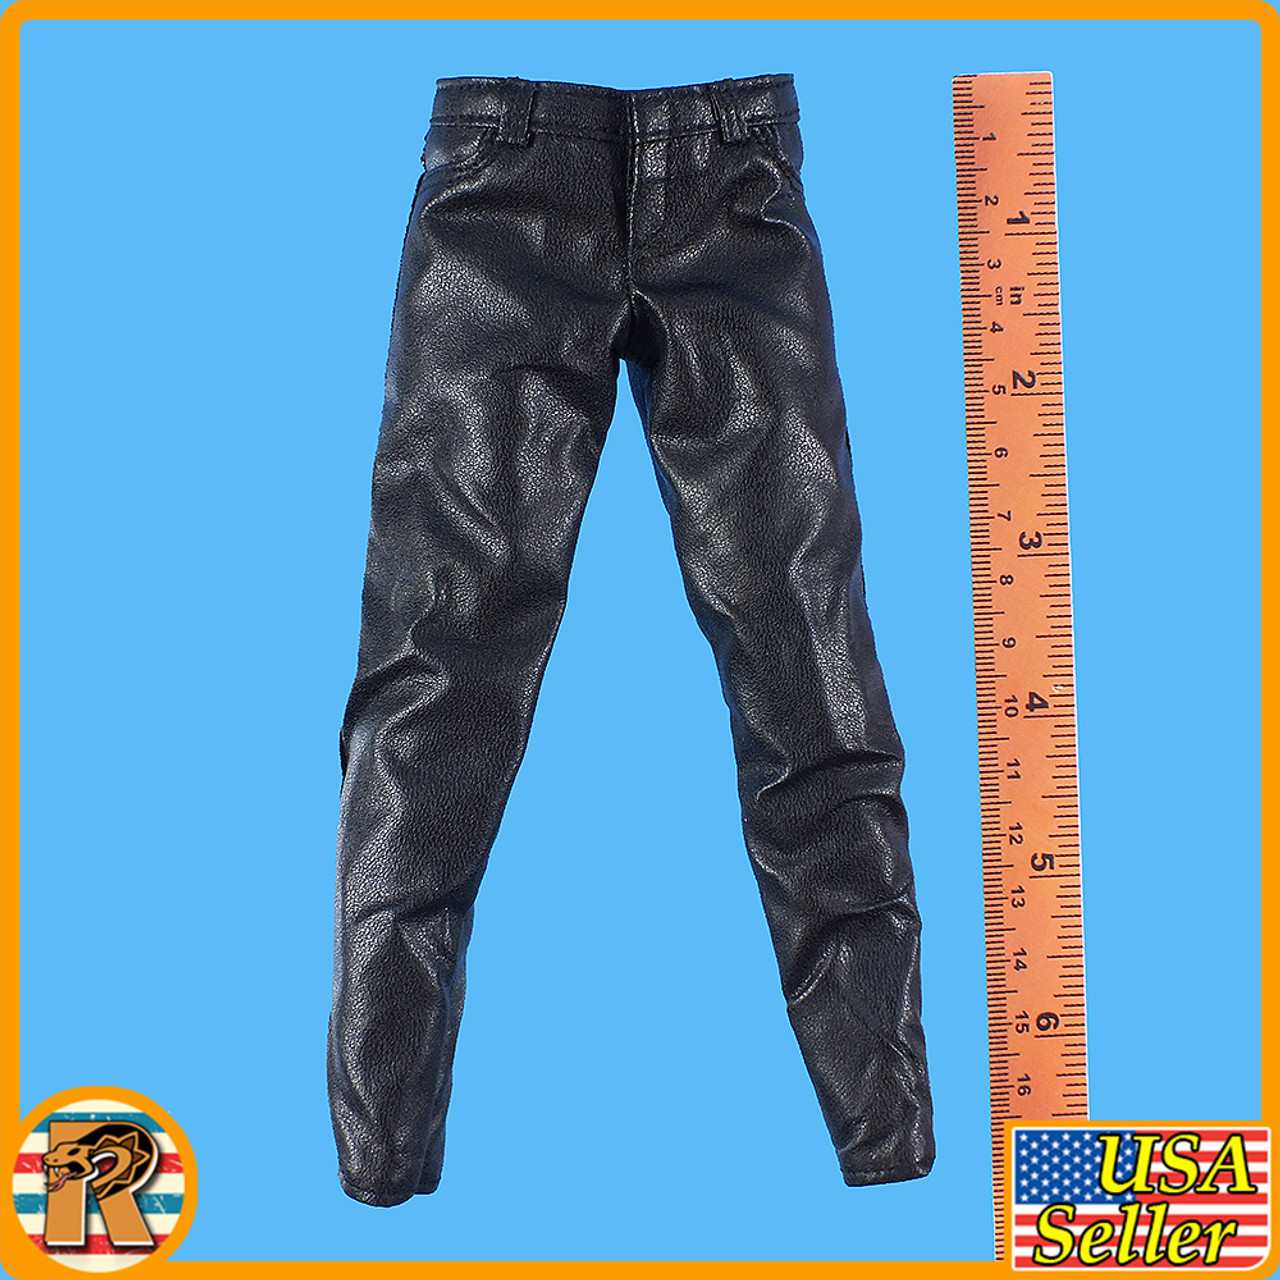 DX Max - Black Leather Pants - 1/6 Scale -